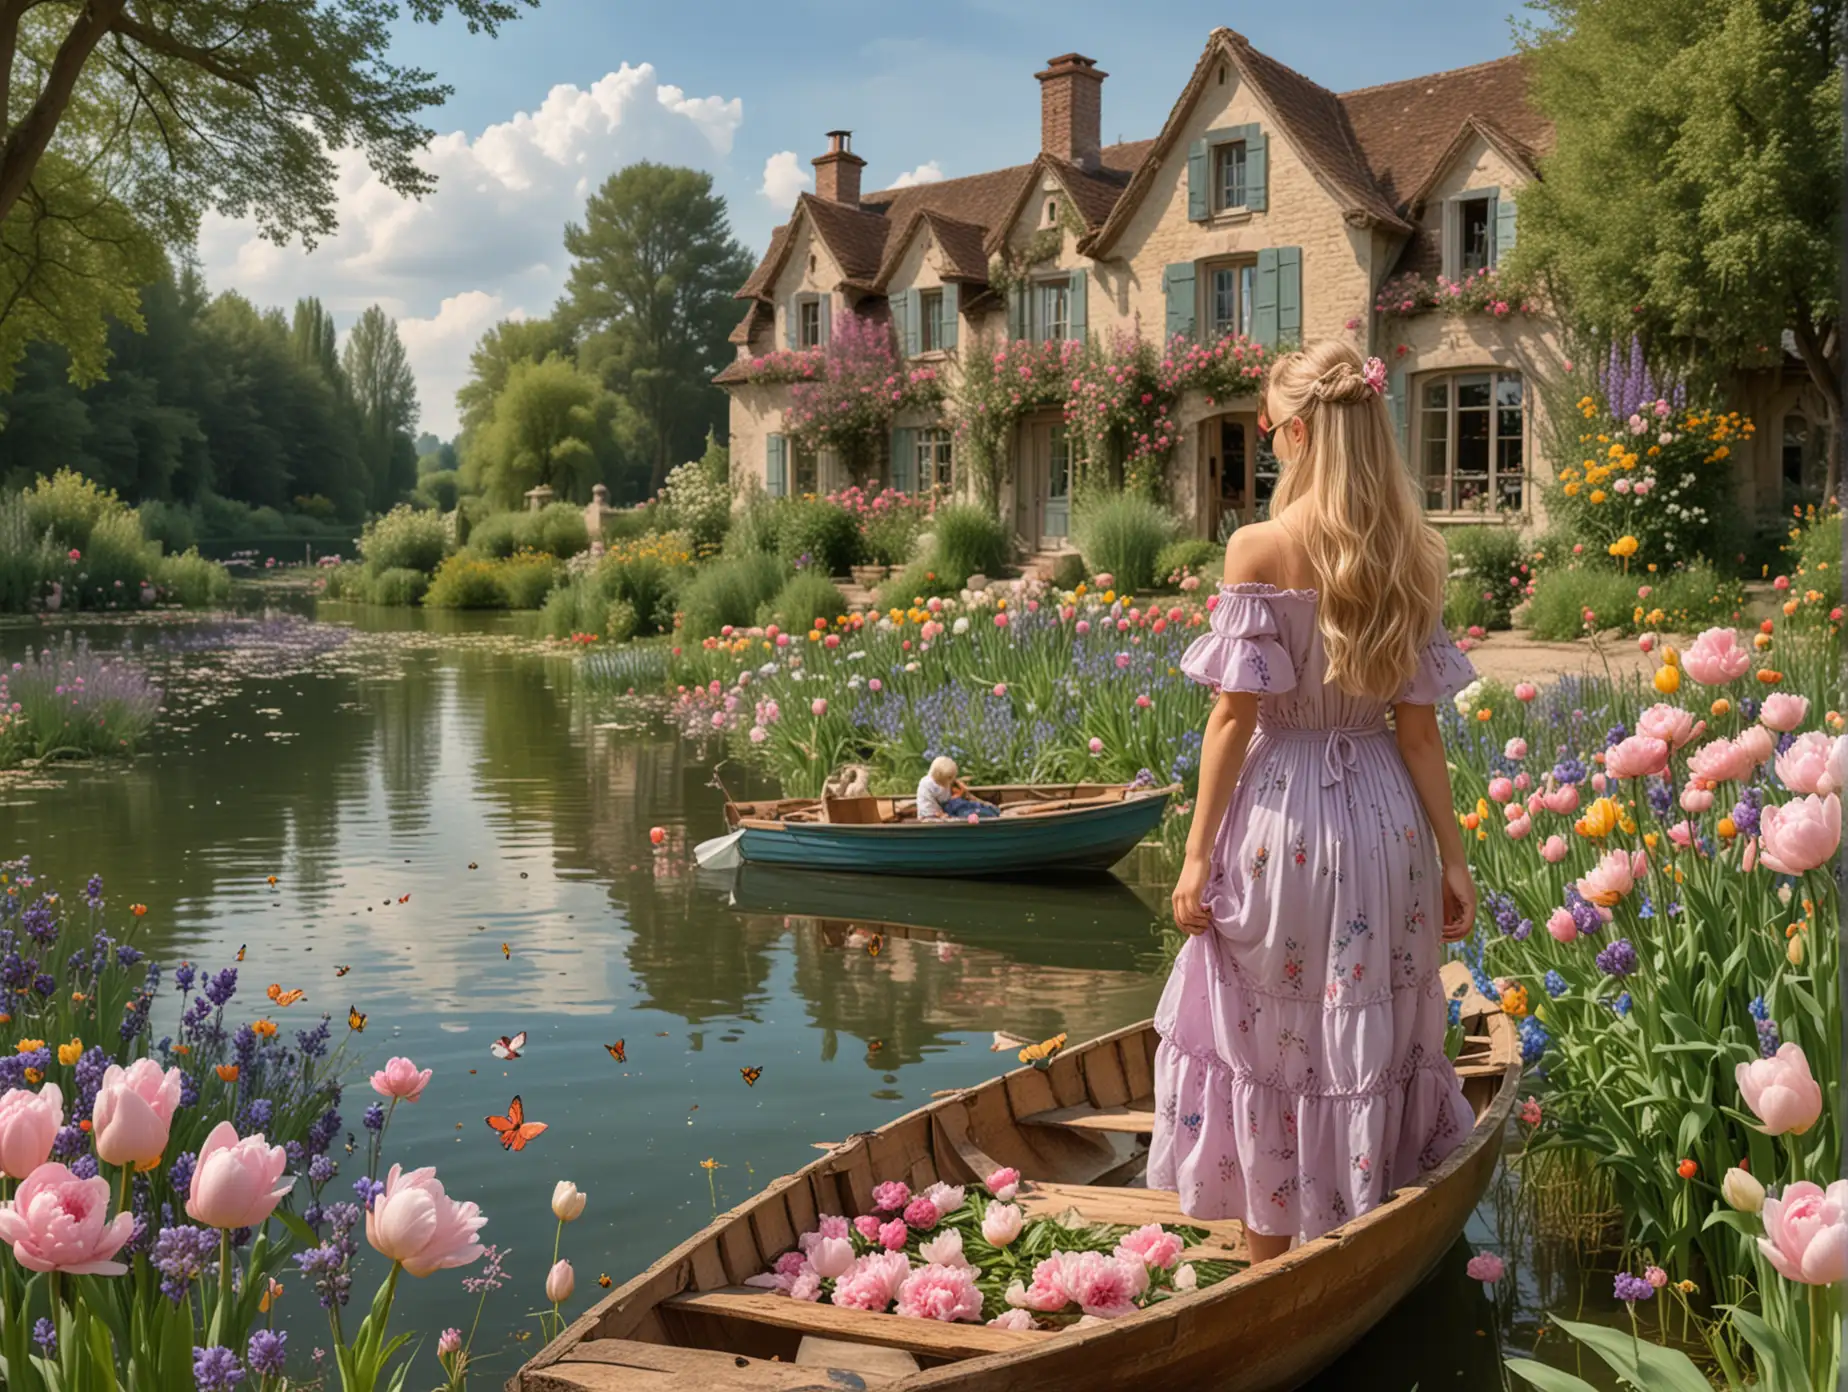 French country style house with a lot of flowers peonies tulips iris roses flying butterflies and bees on the lake with small boat with blond girl in lavender dress and flowers on hair